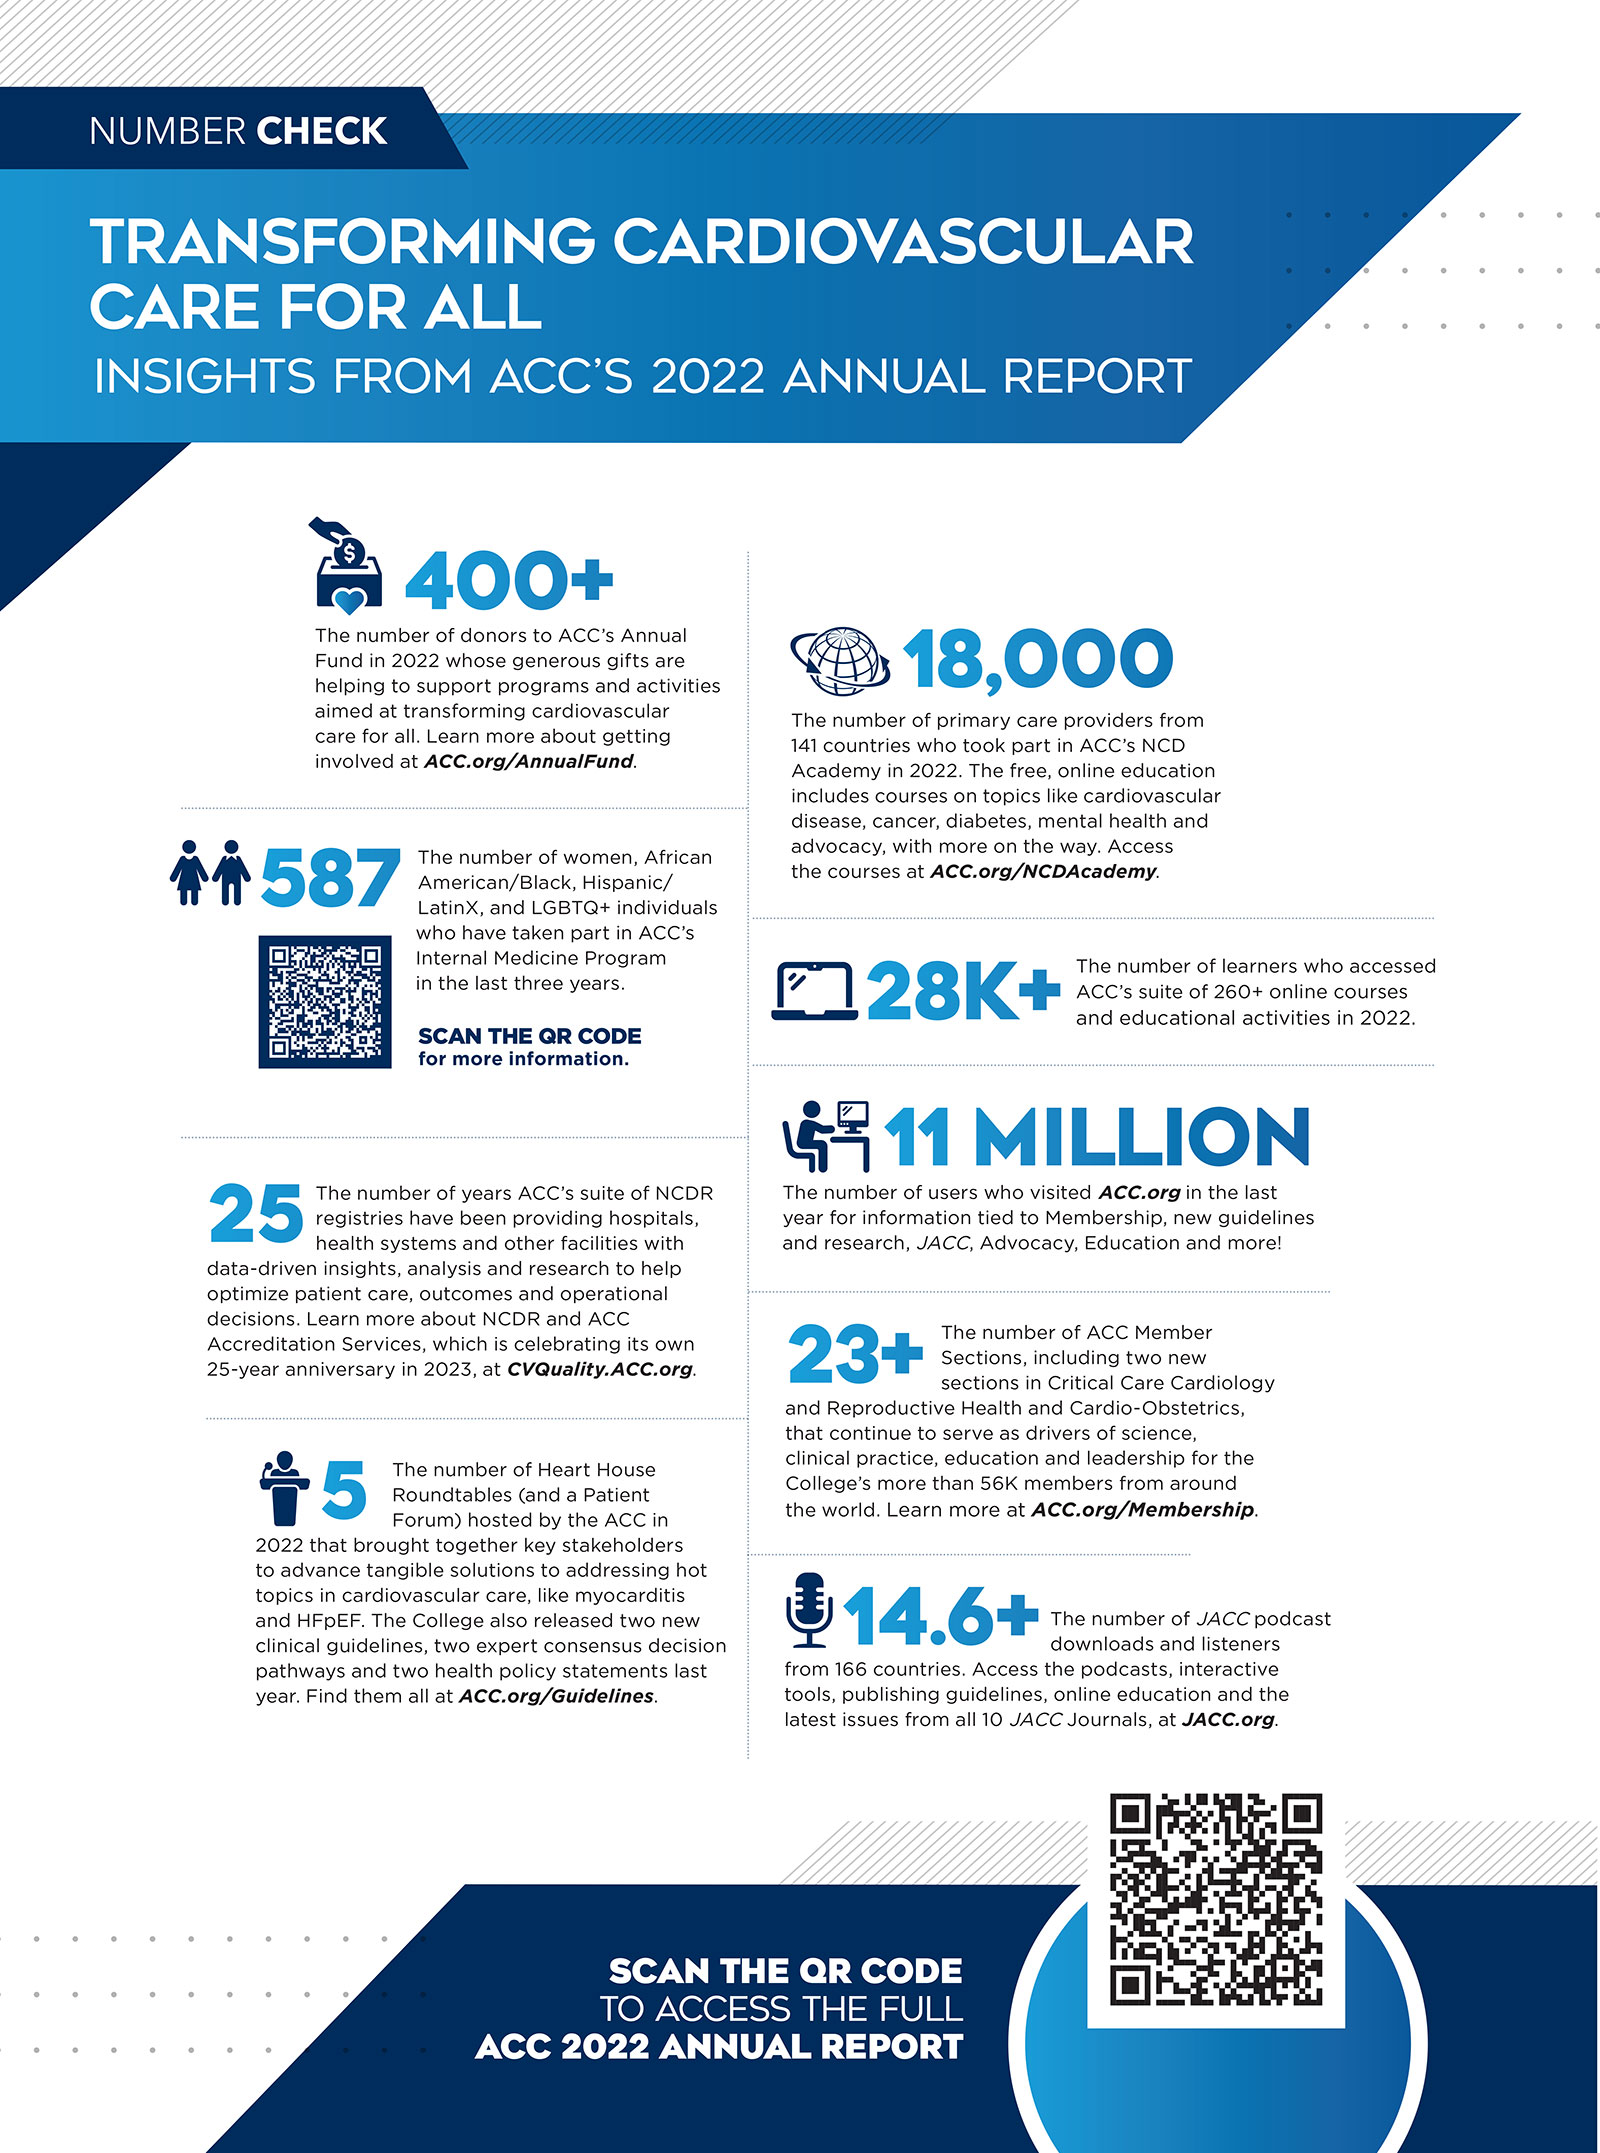 Number Check | Transforming Cardiovascular Care For All: Insights From ACC’s 2022 Annual Report